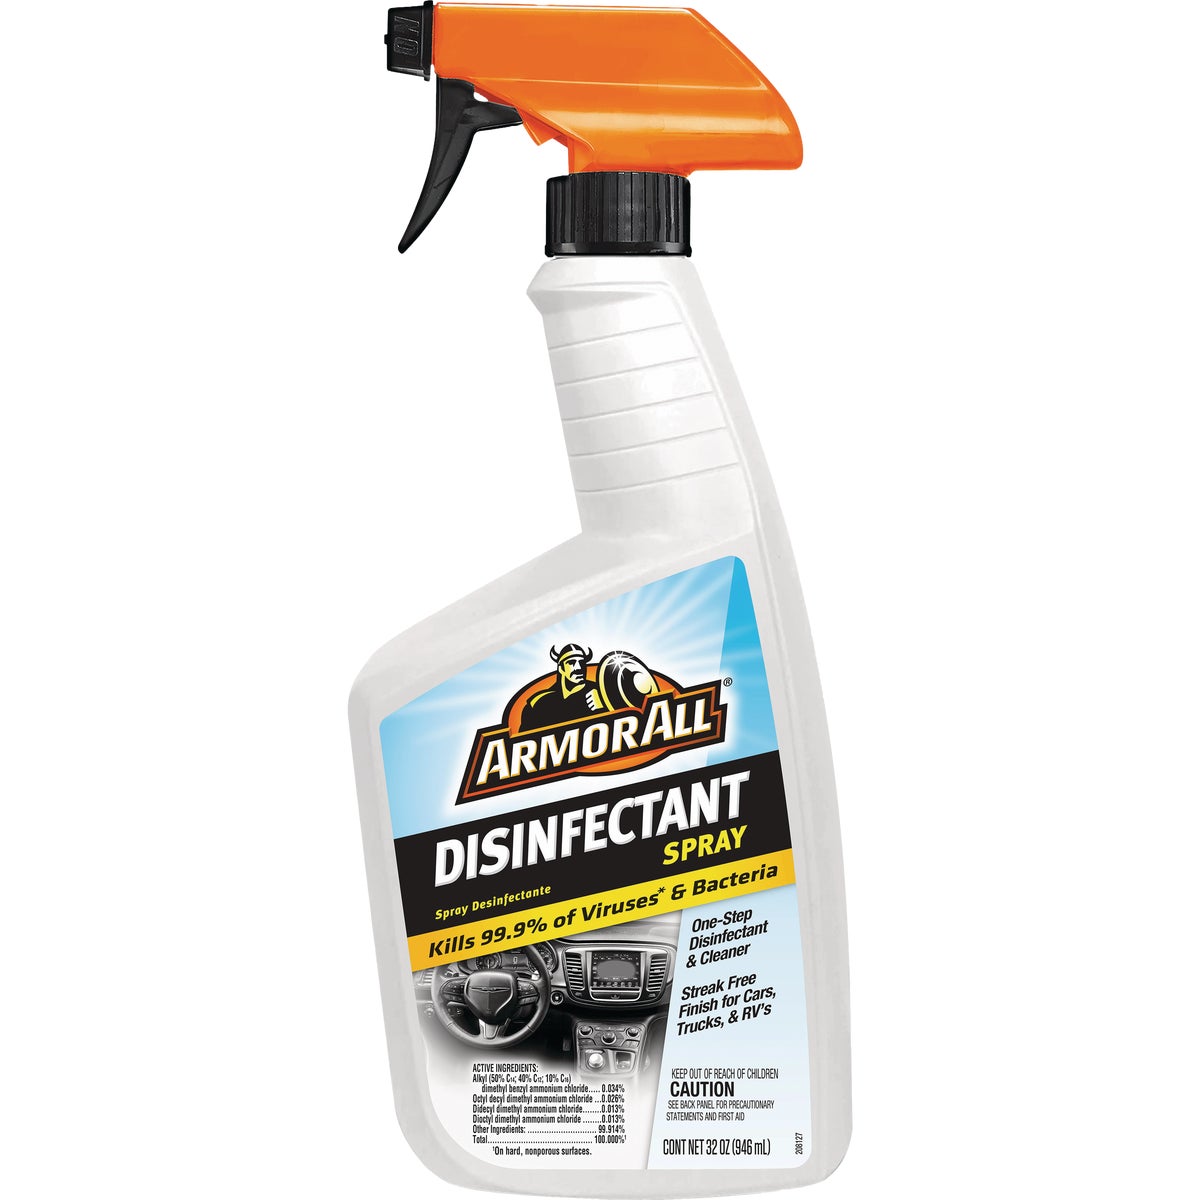 Armor All 32 Oz. Cleaner and Disinfectant Spray